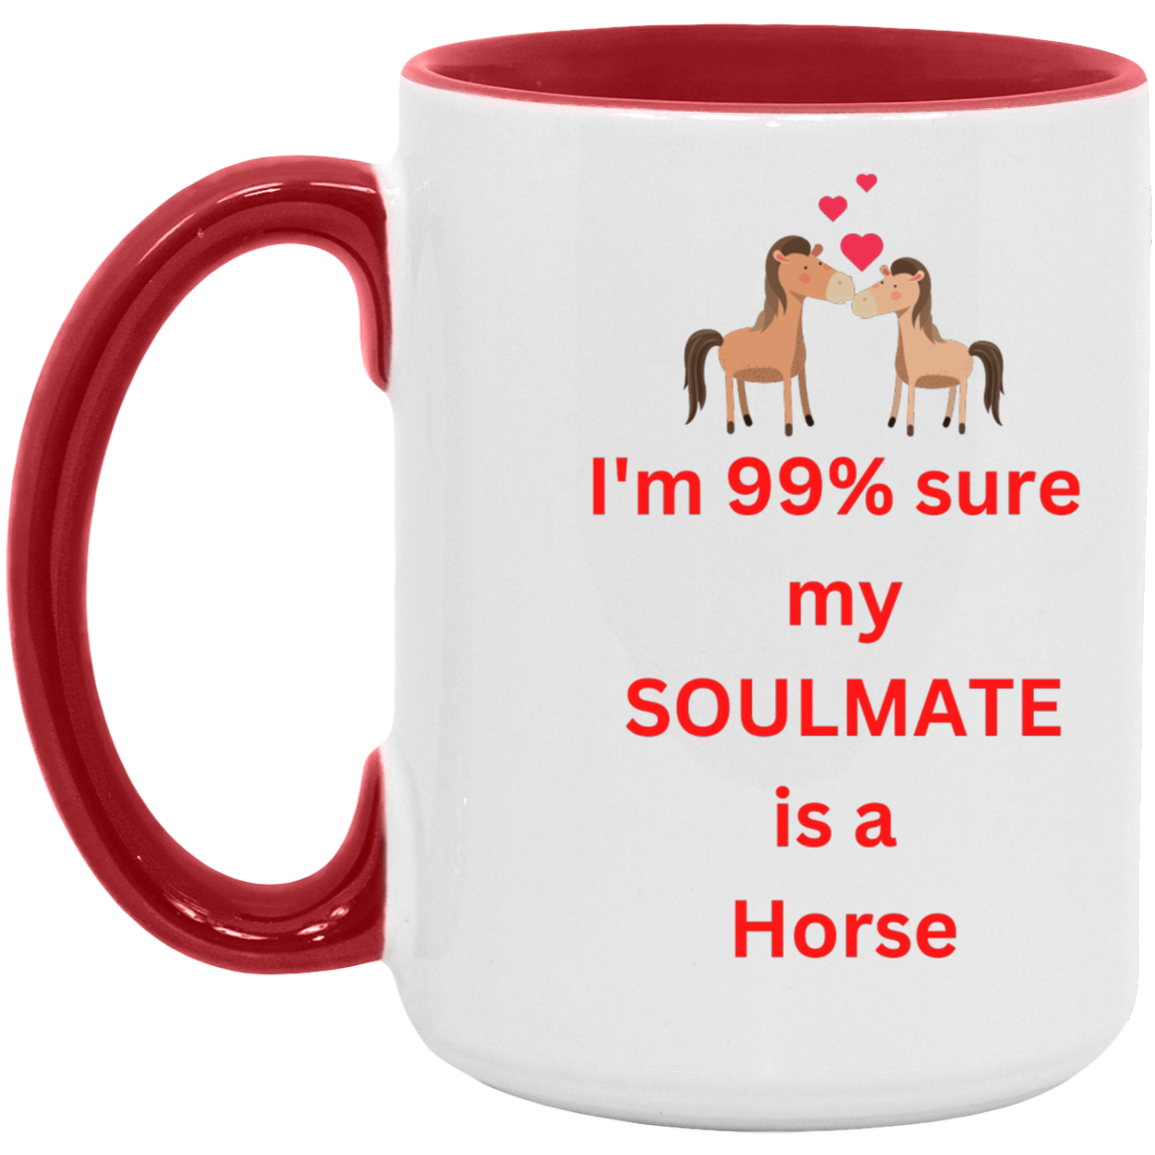 My Soulmate is a Horse Mug - MyAllOutHorses